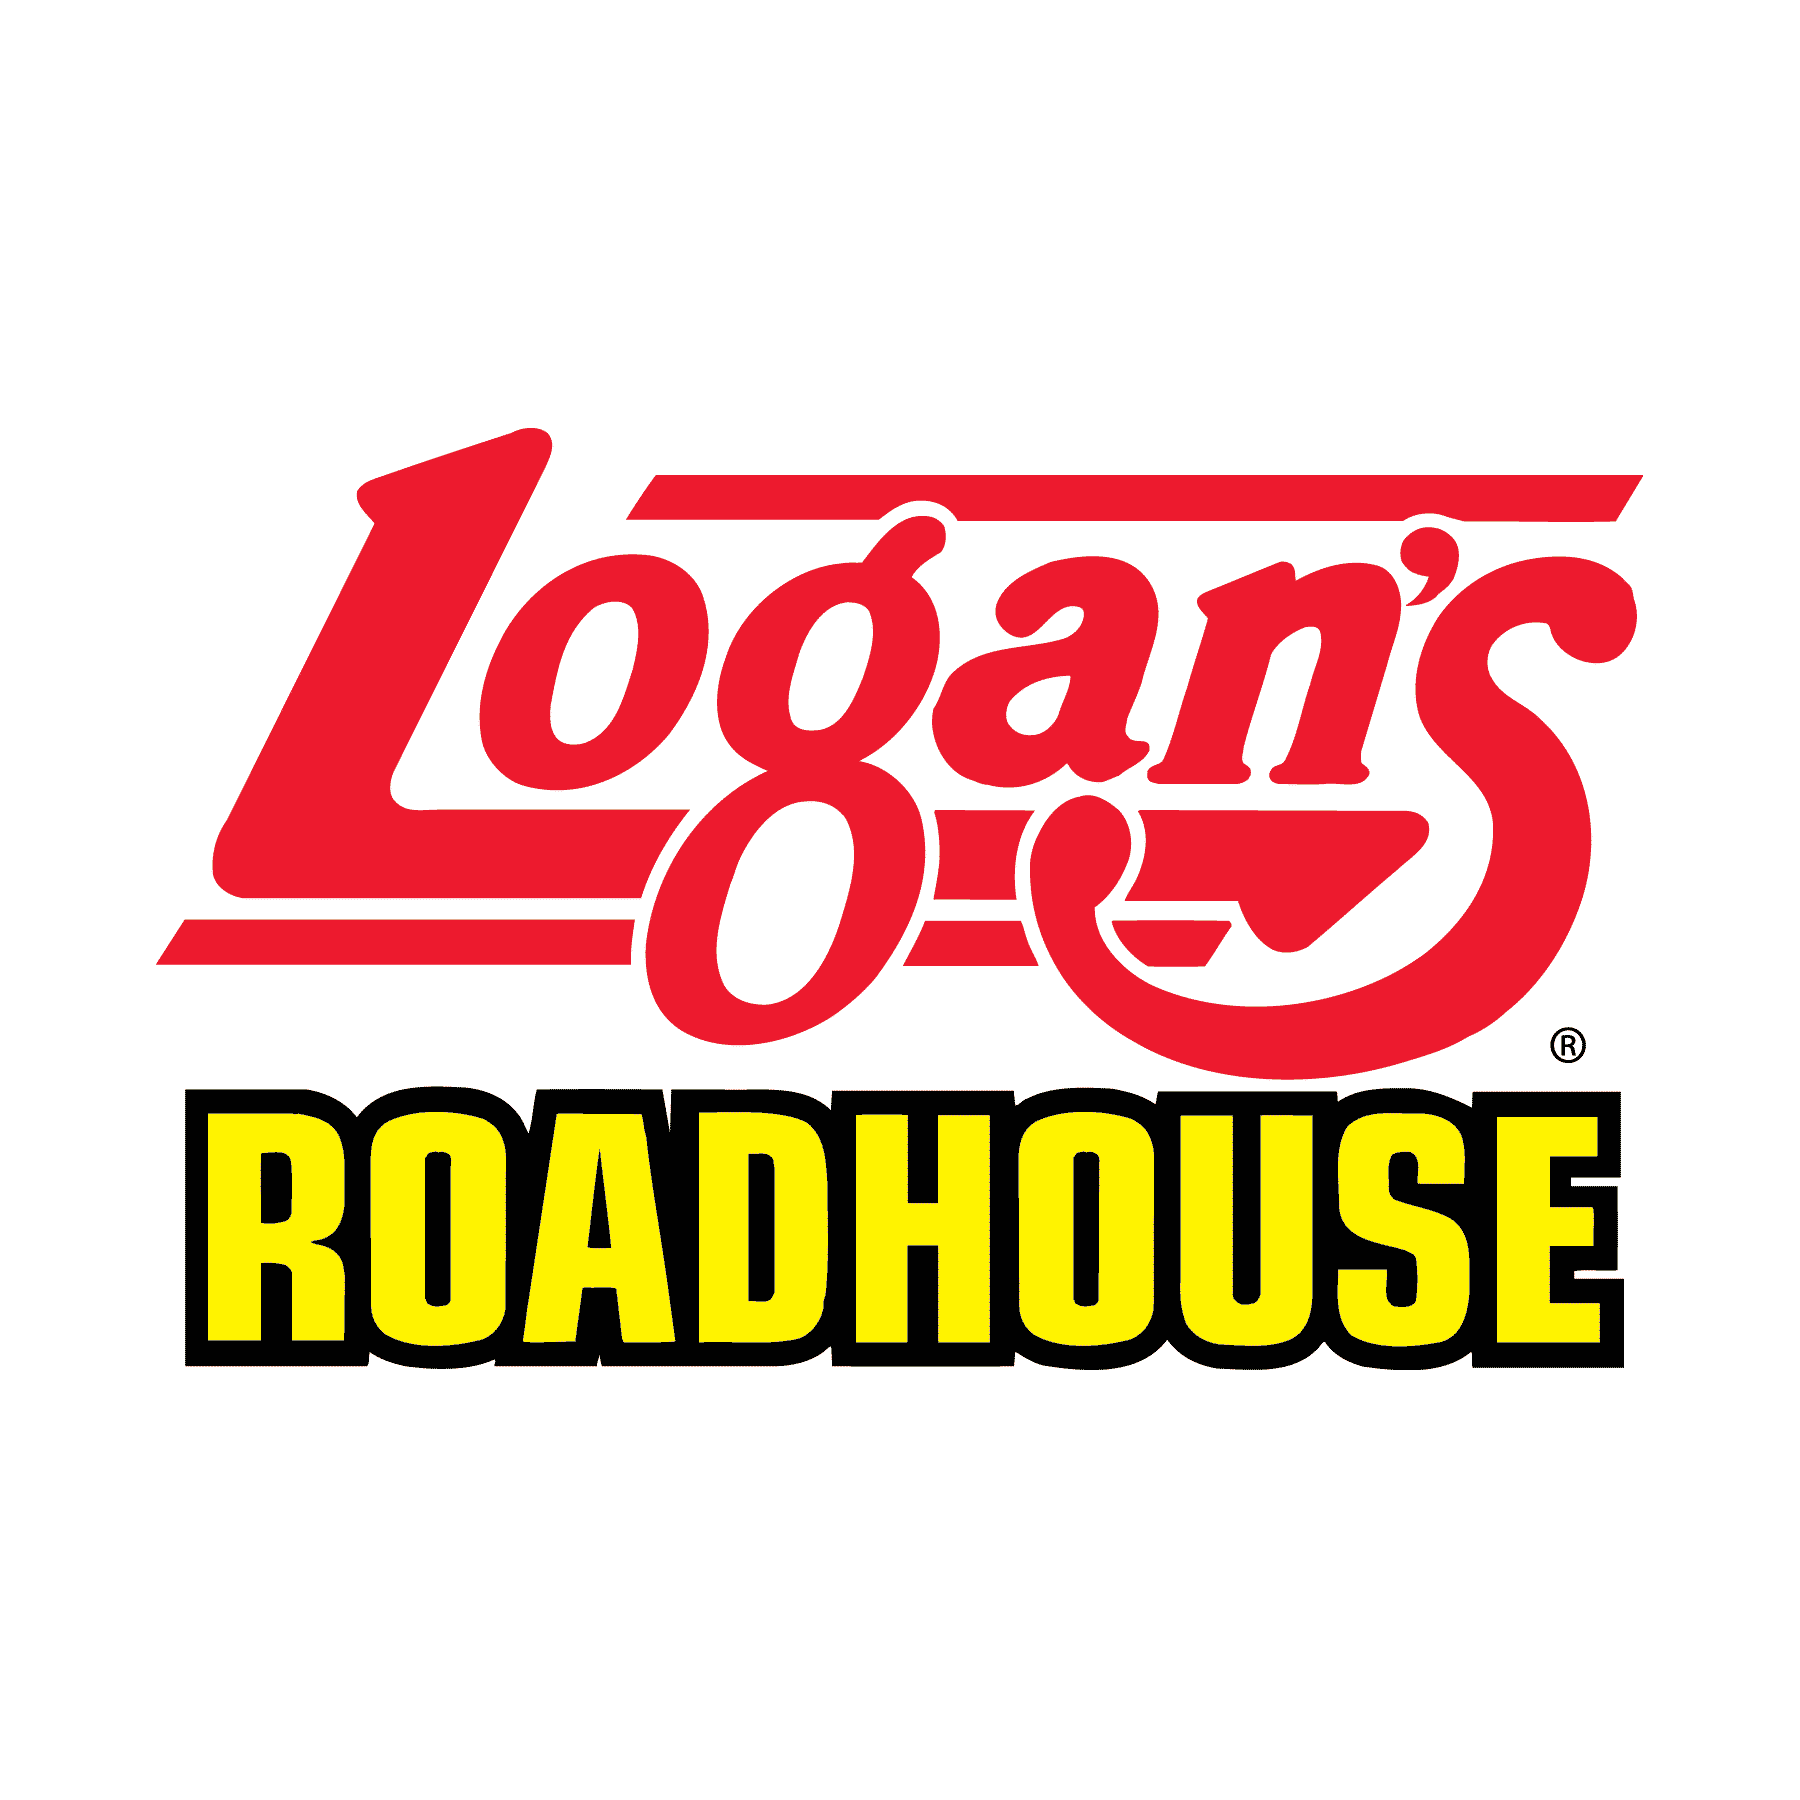 Logan Roadhouse coupon codes, promo codes and deals